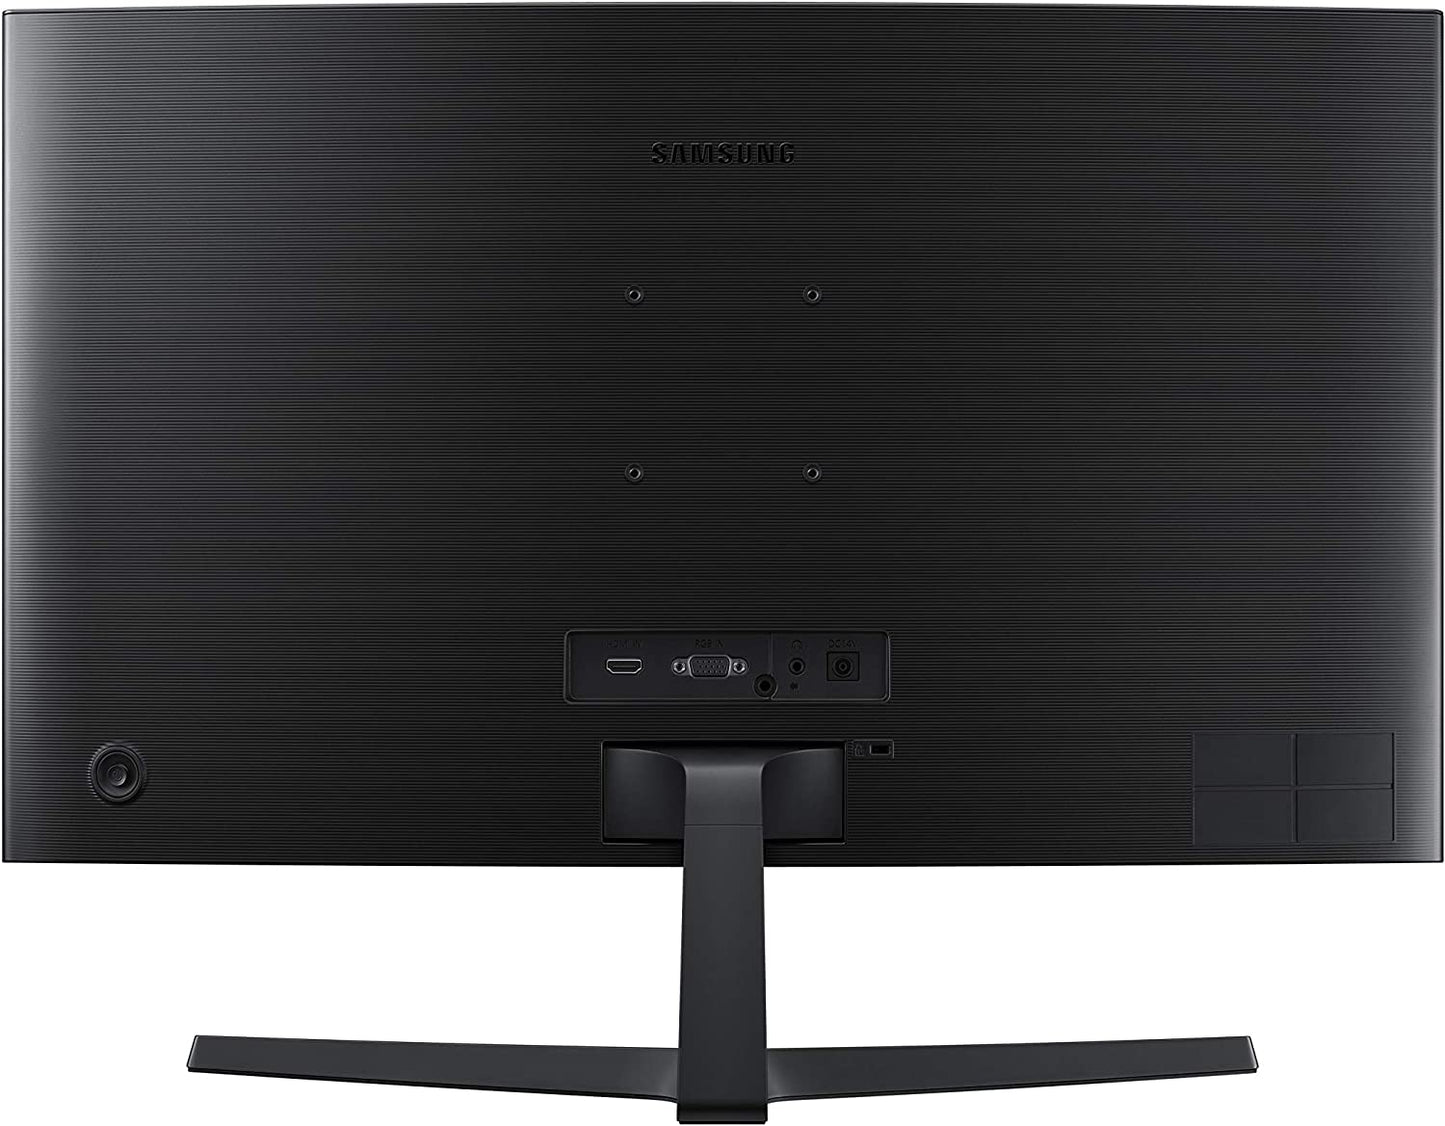 Samsung 24-in CF396 Curved LED Computer Gaming Monitor, 4ms, LC24F396FHNXZA